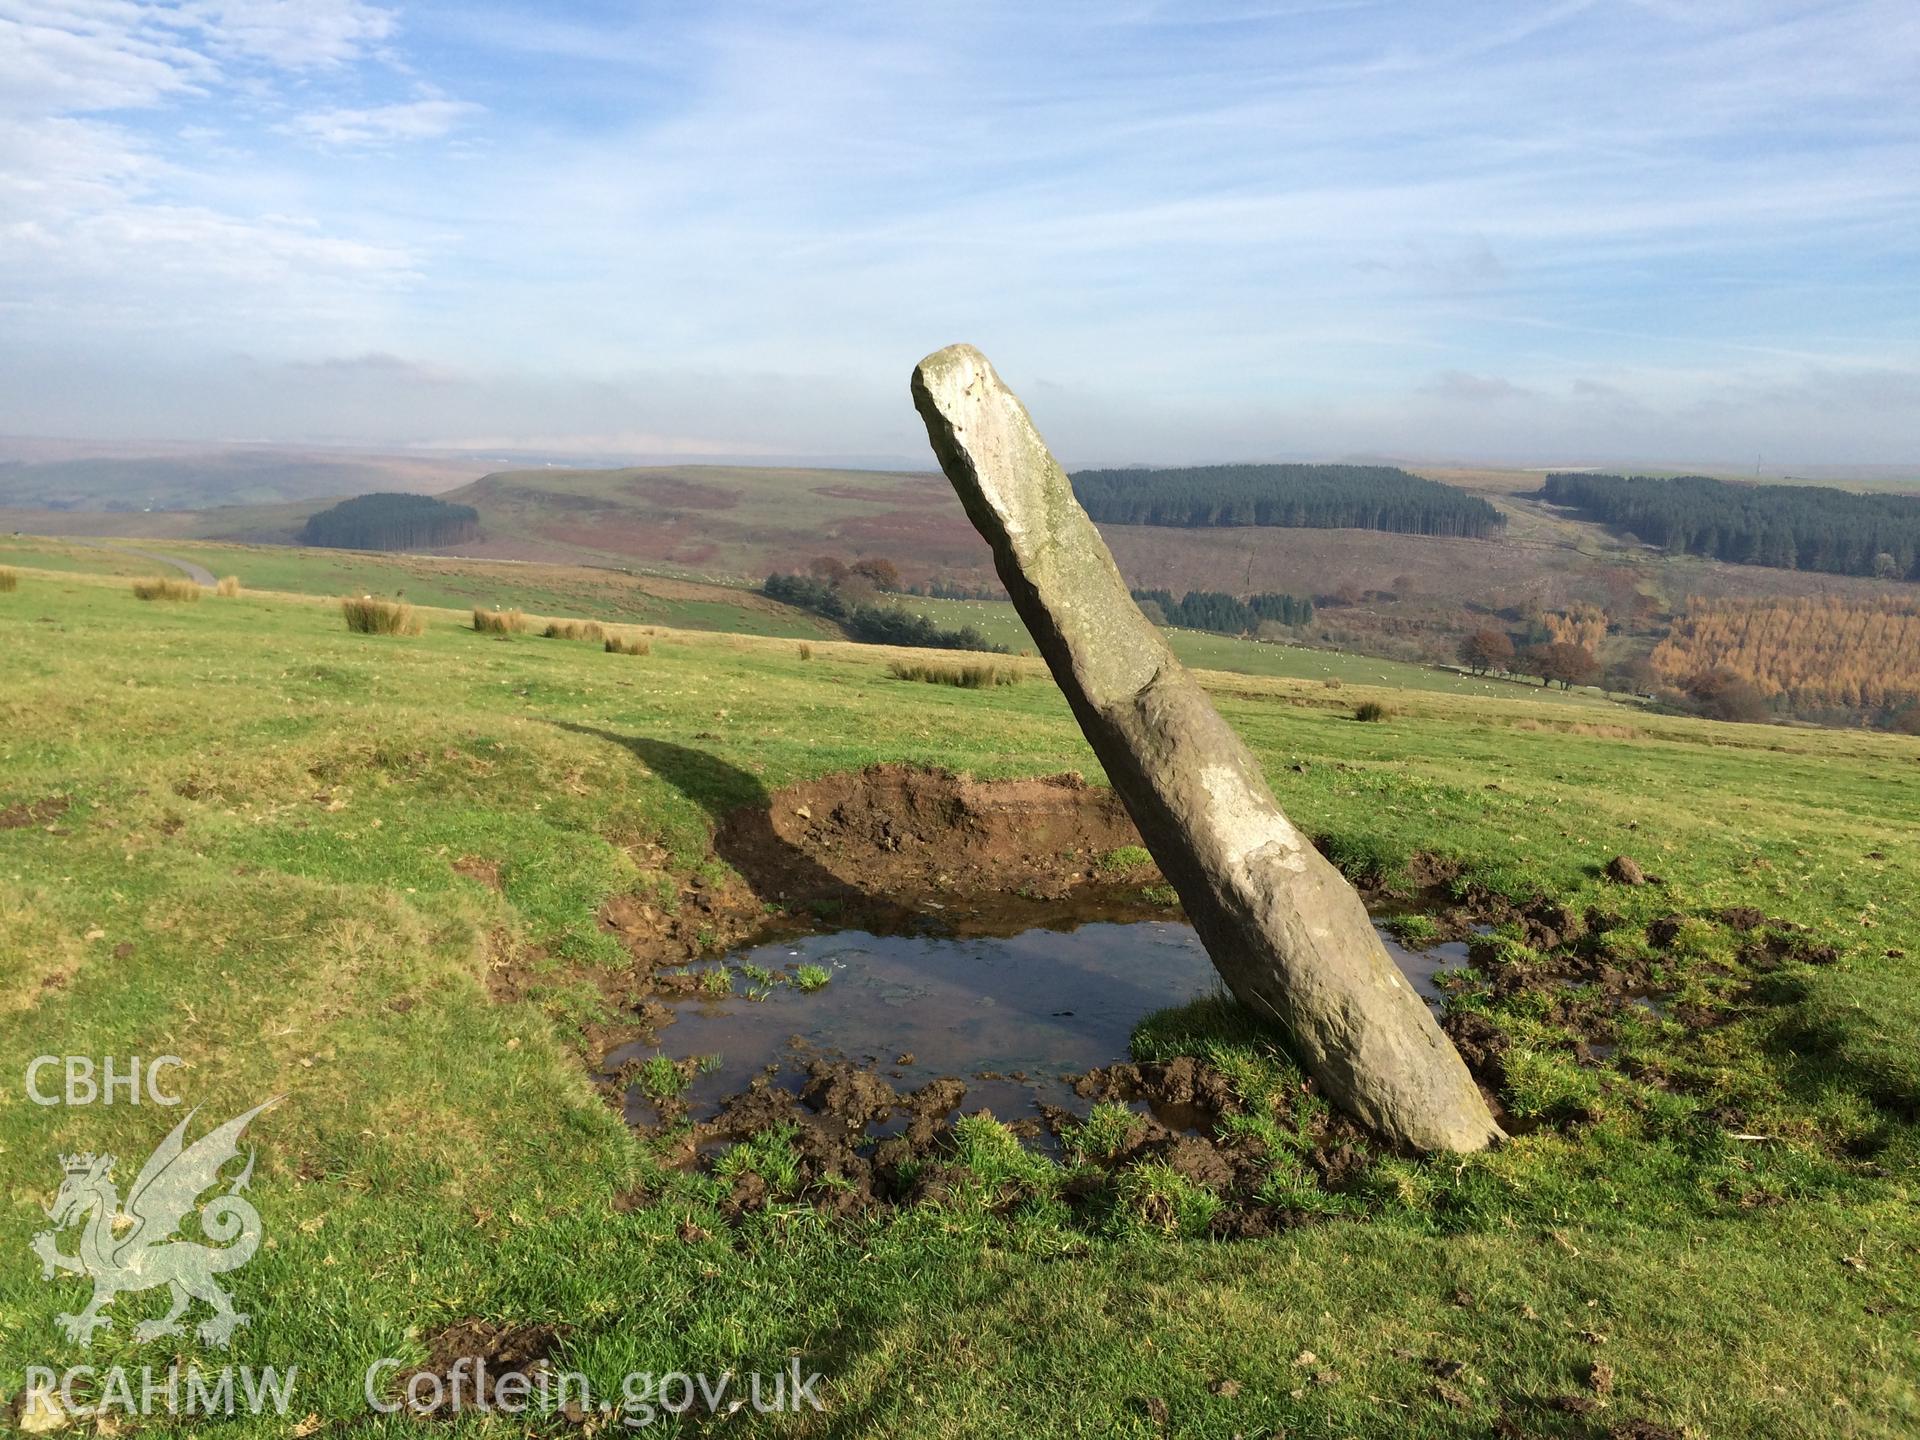 Colour photo of Cefn Gelli-Gaer Inscribed Stone, taken by Paul R. Davis and dated 31st October 2015.